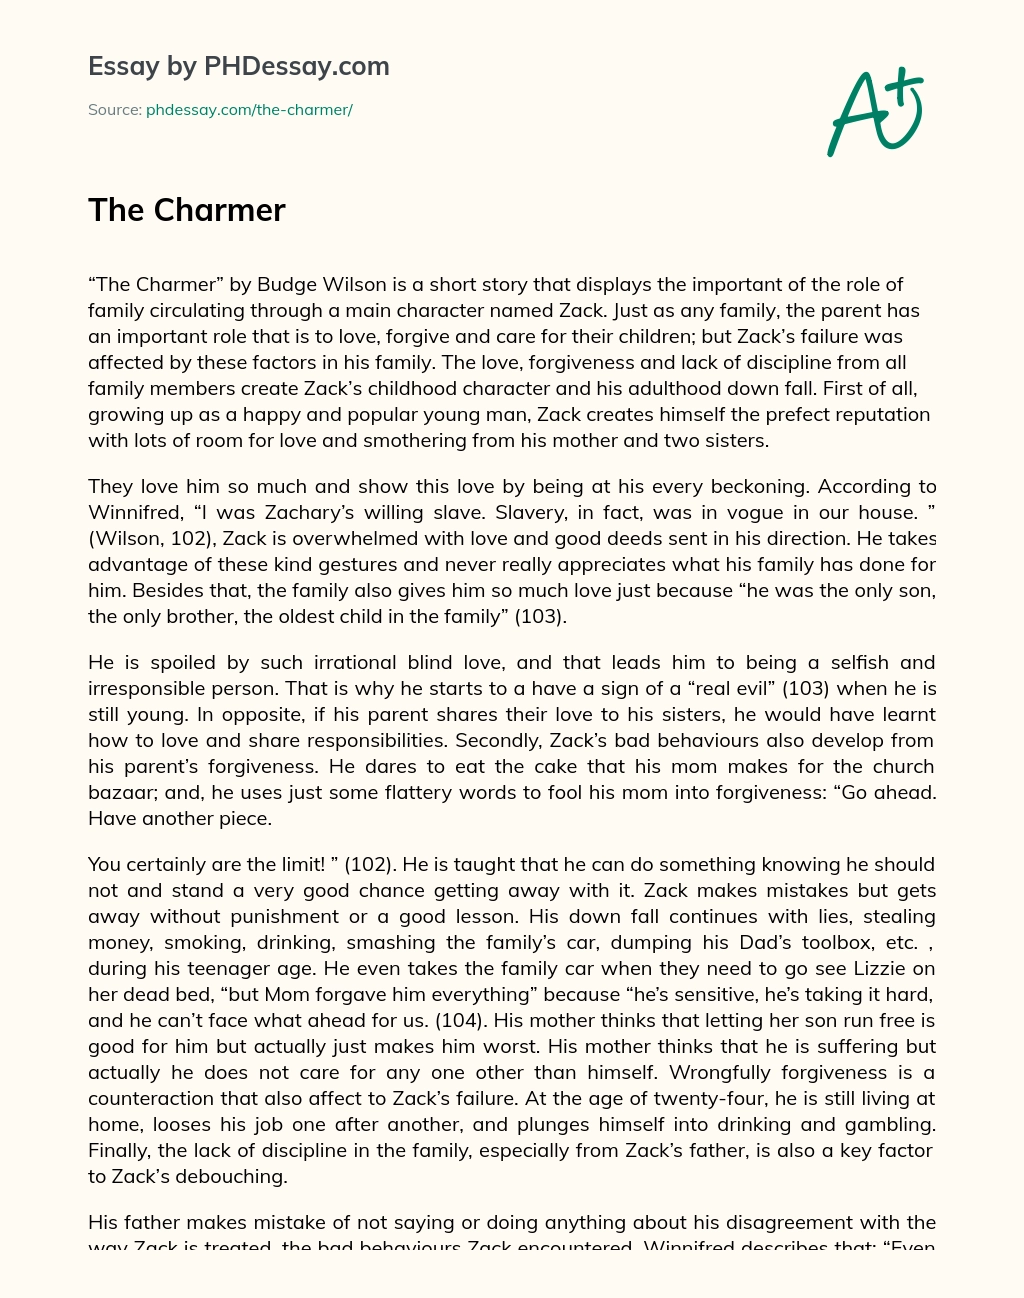 The Charmer”: The Role of Family in Shaping a Character’s Life and Downfall essay